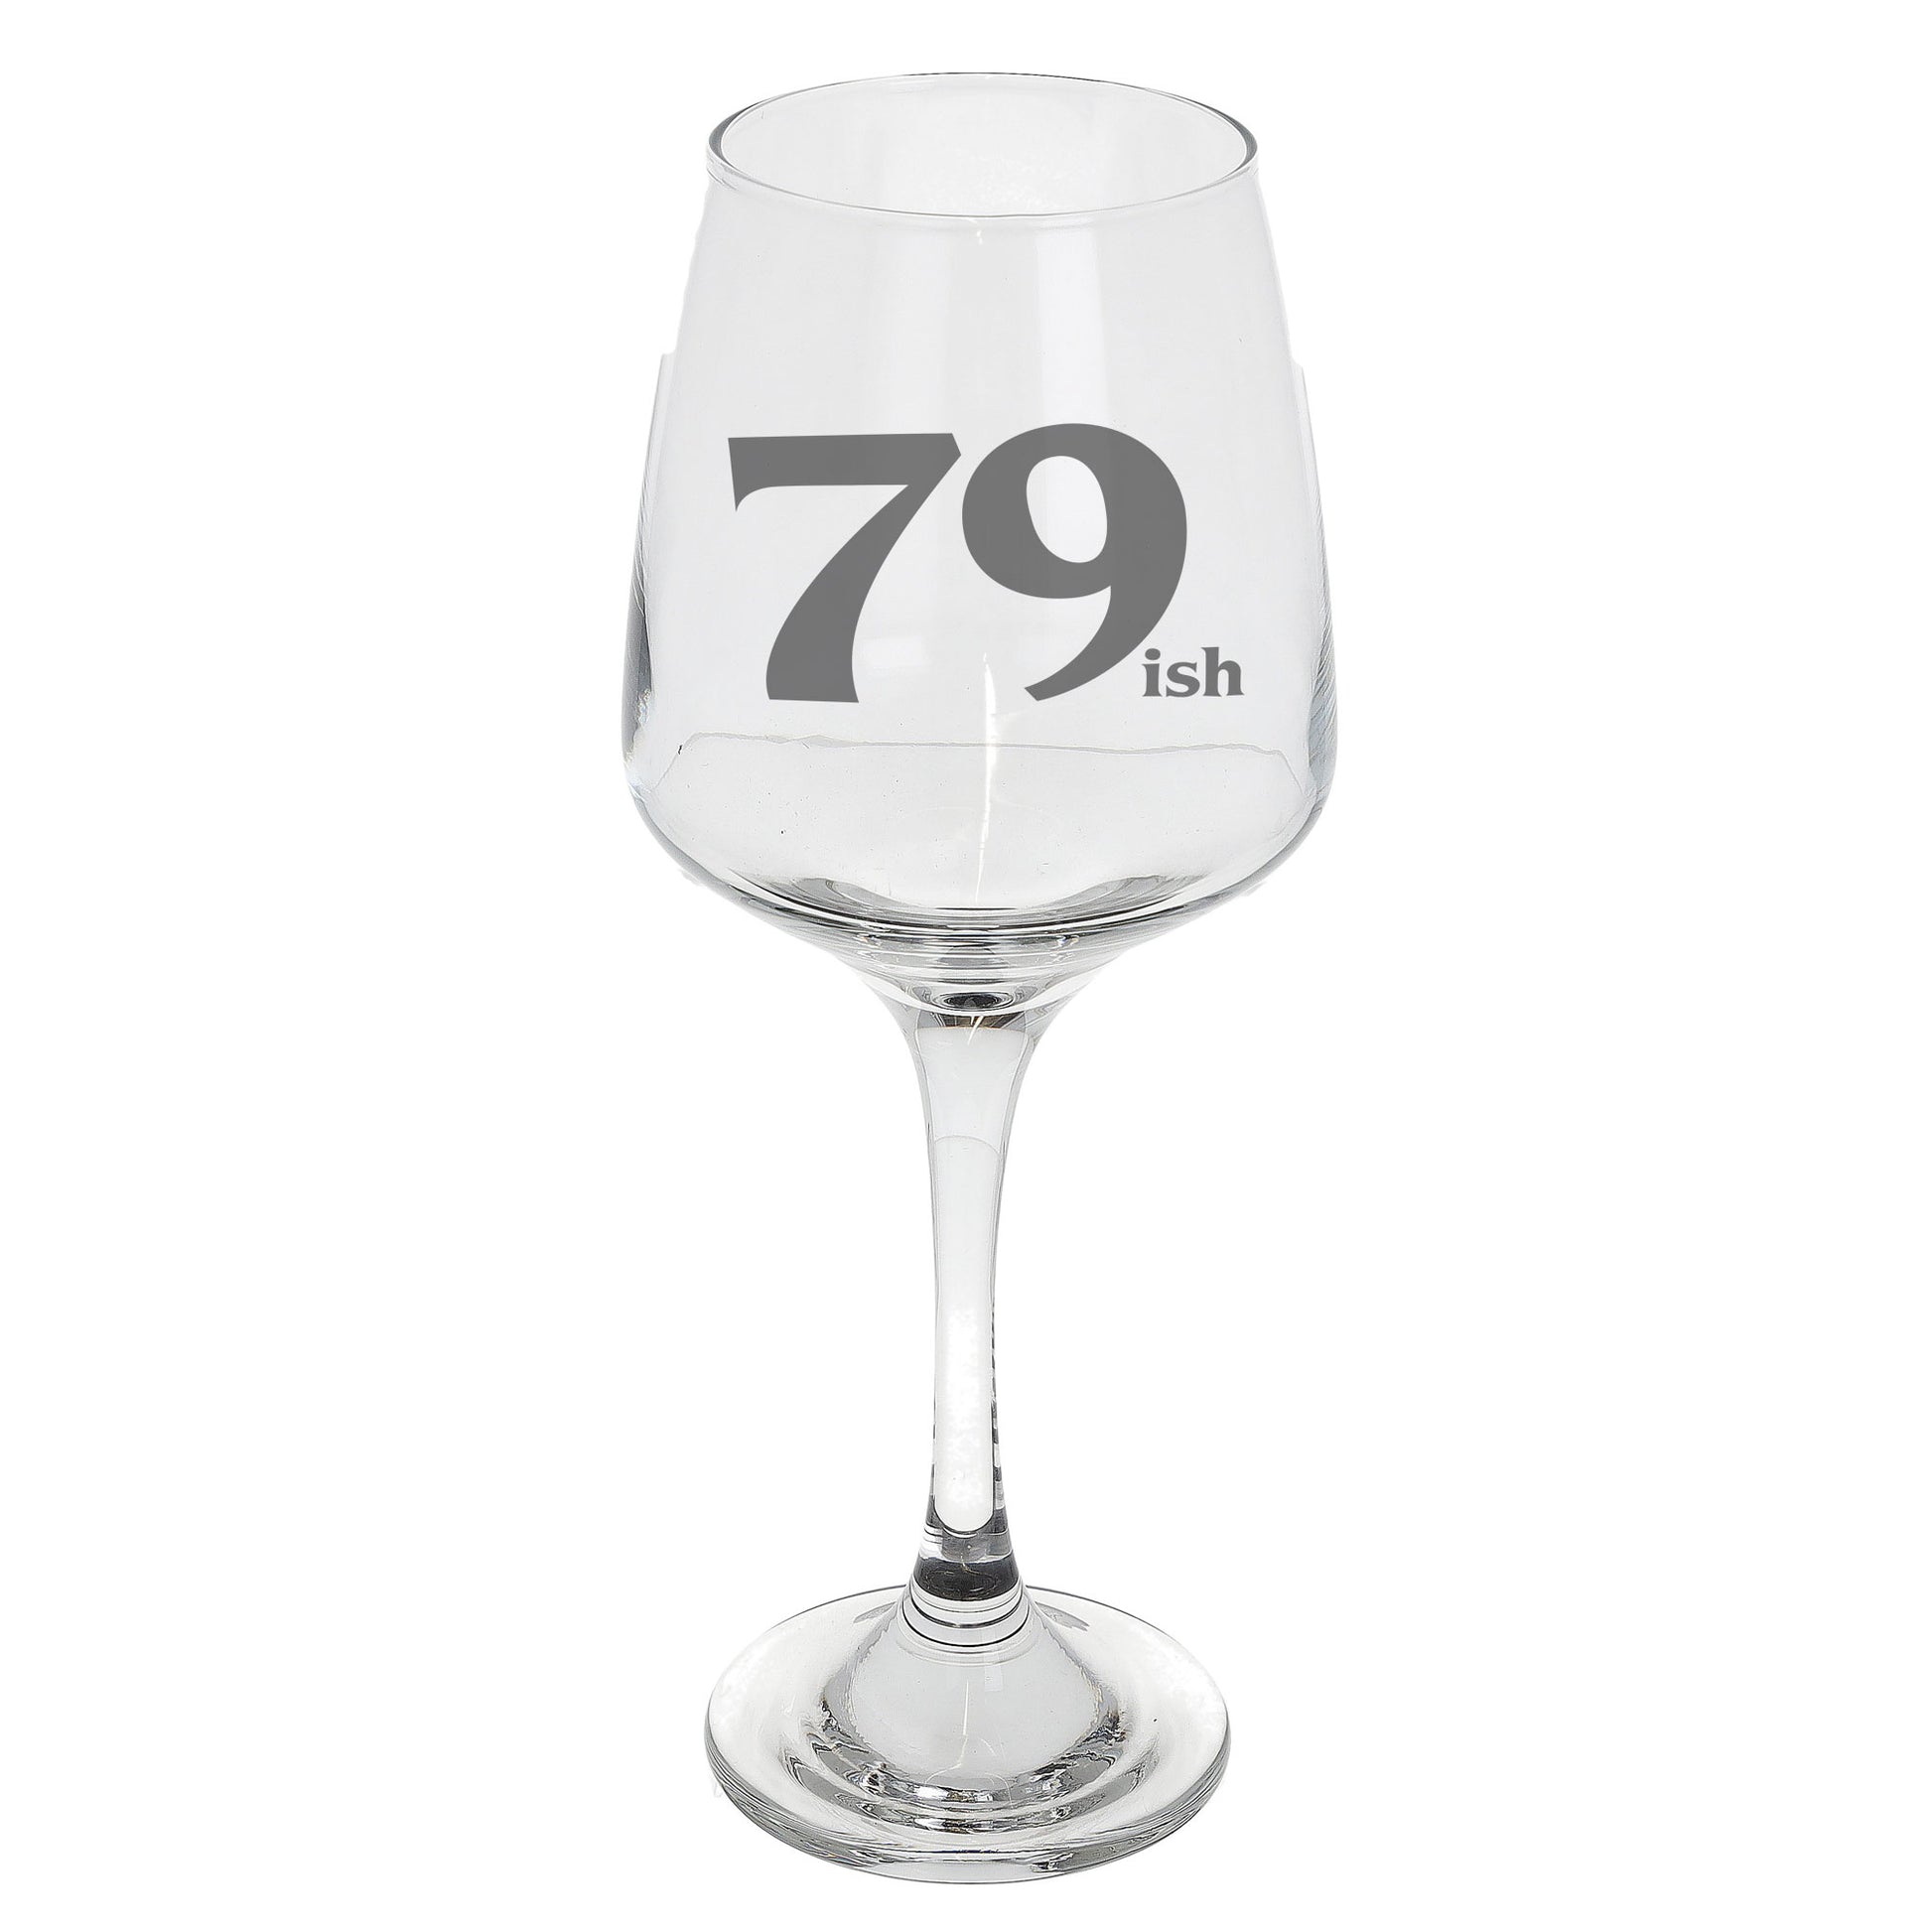 79ish Wine Glass and/or Coaster Set  - Always Looking Good - Wine Glass On Its Own  